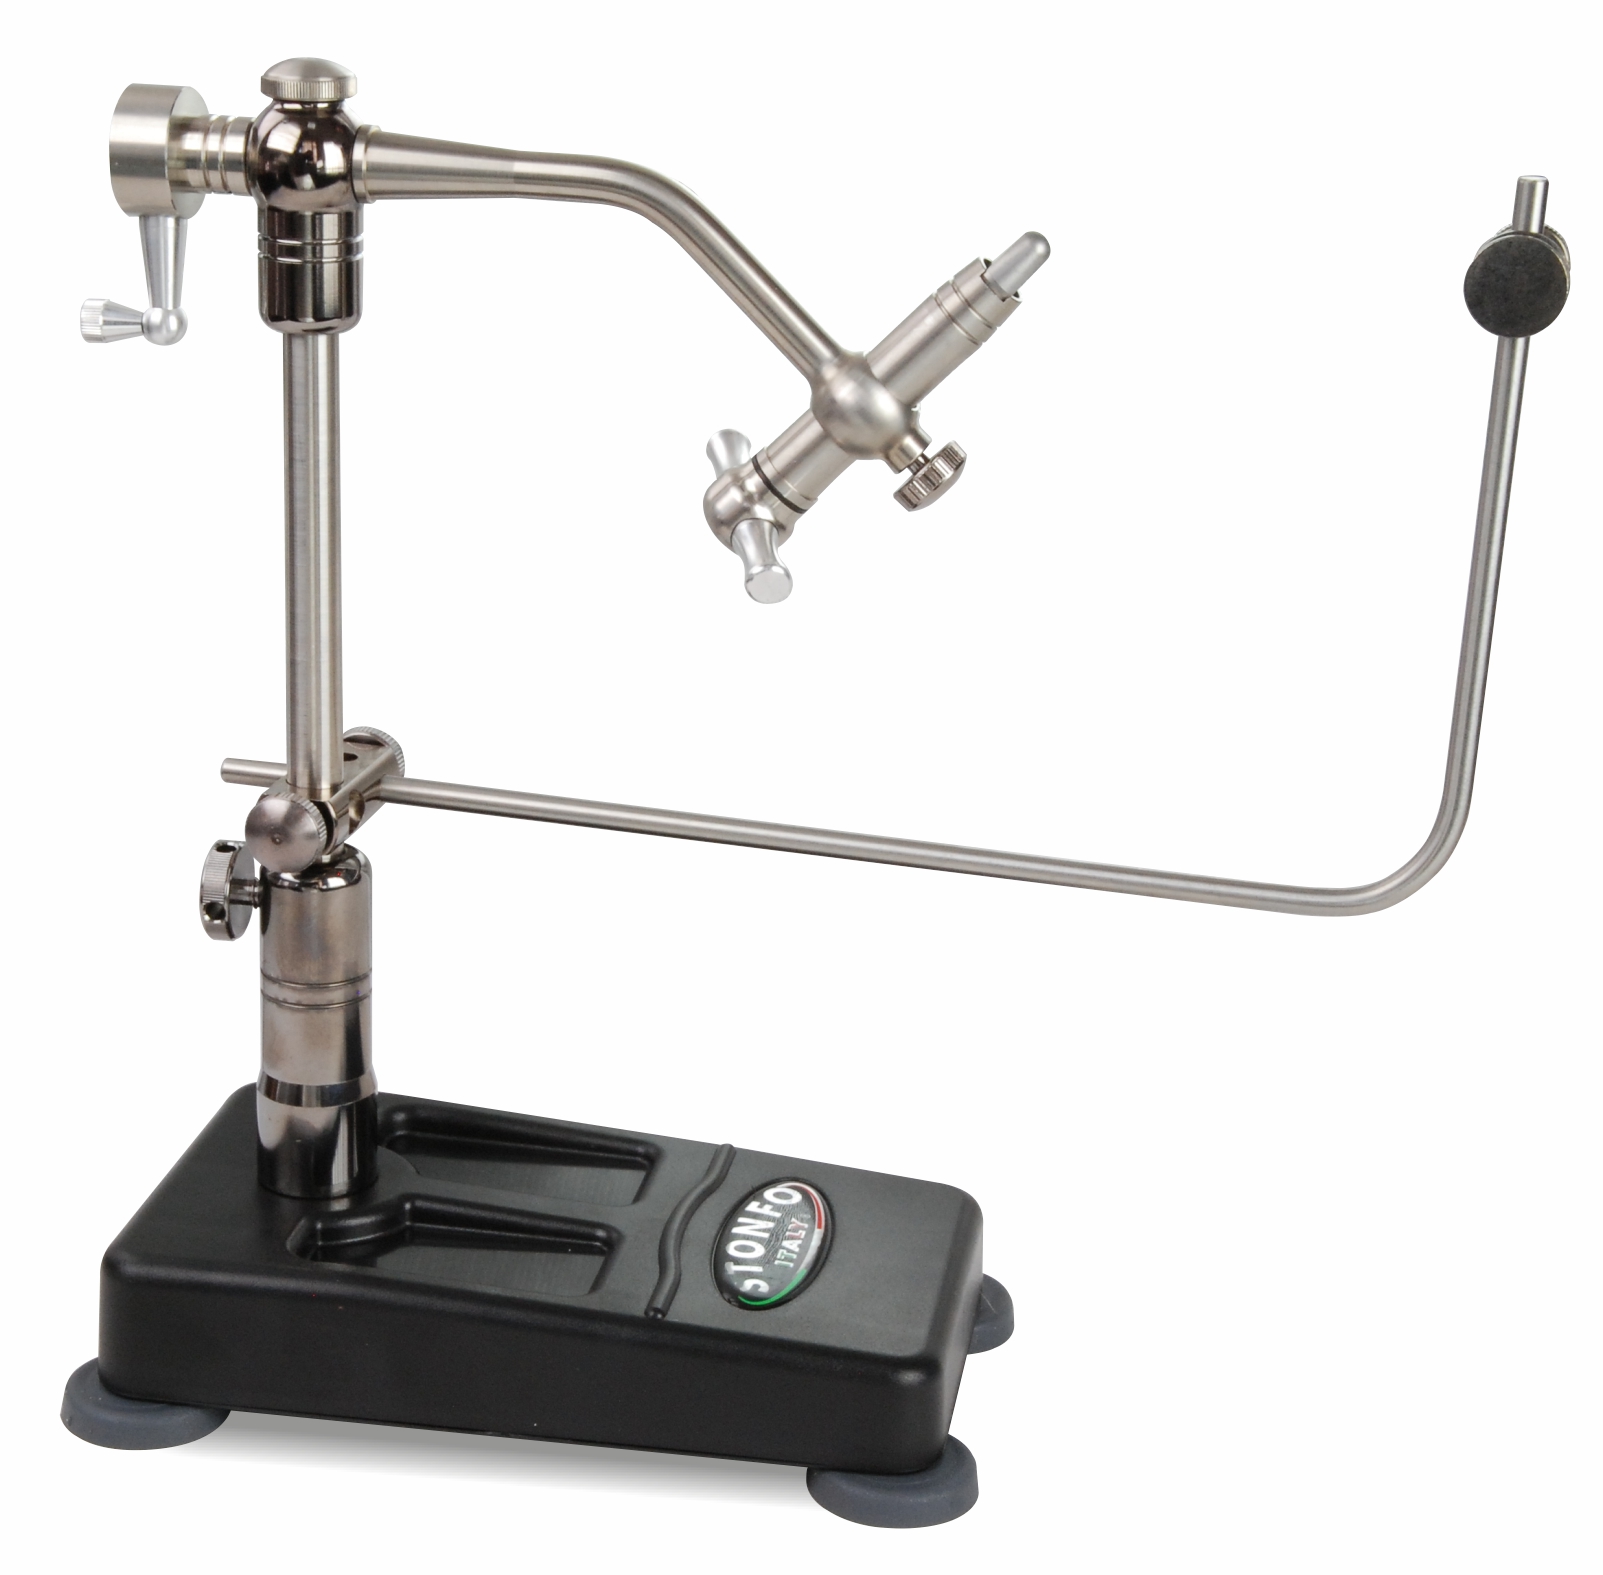 perfk Fly Tying Vise Fly Tying Vice with Hardened Steel Jaw